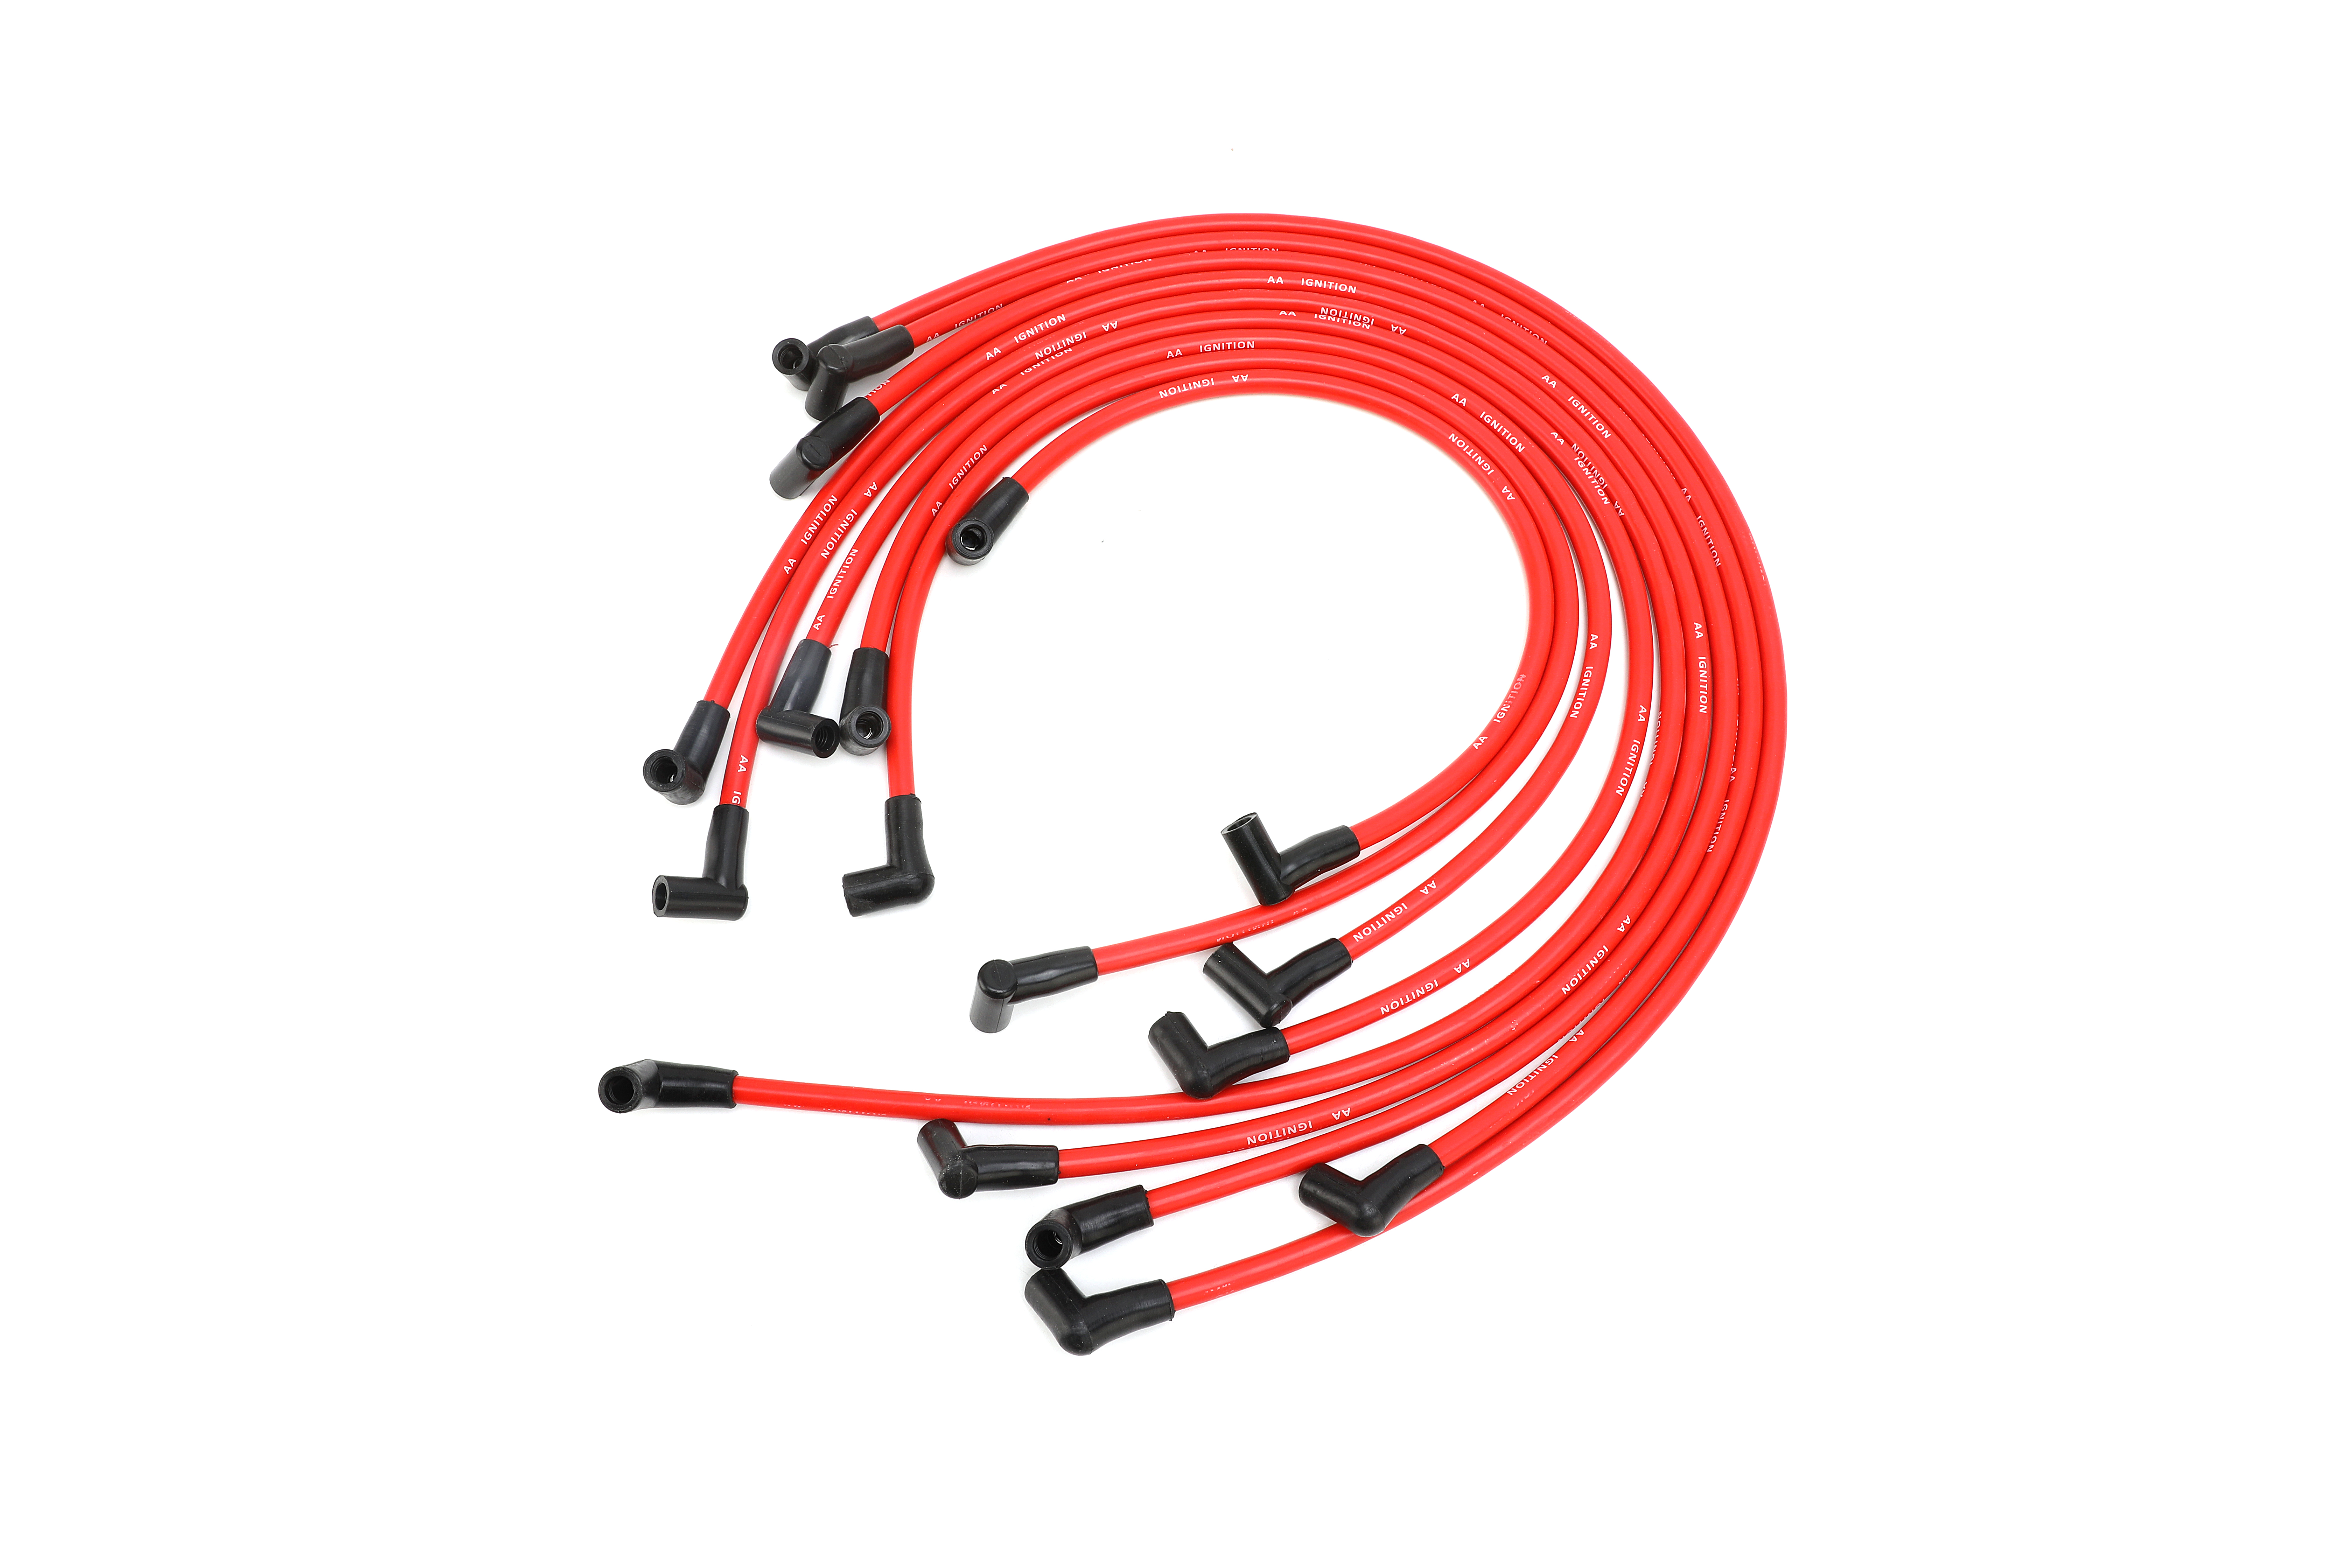 BBC Small Block 307 350 Universal Spark Plug Wire Set 454 496 10.5mm High Performance Kit GM SBC Compatible with Chevy 502 and more with HEI Distributor 327 Big Block Engines 427 